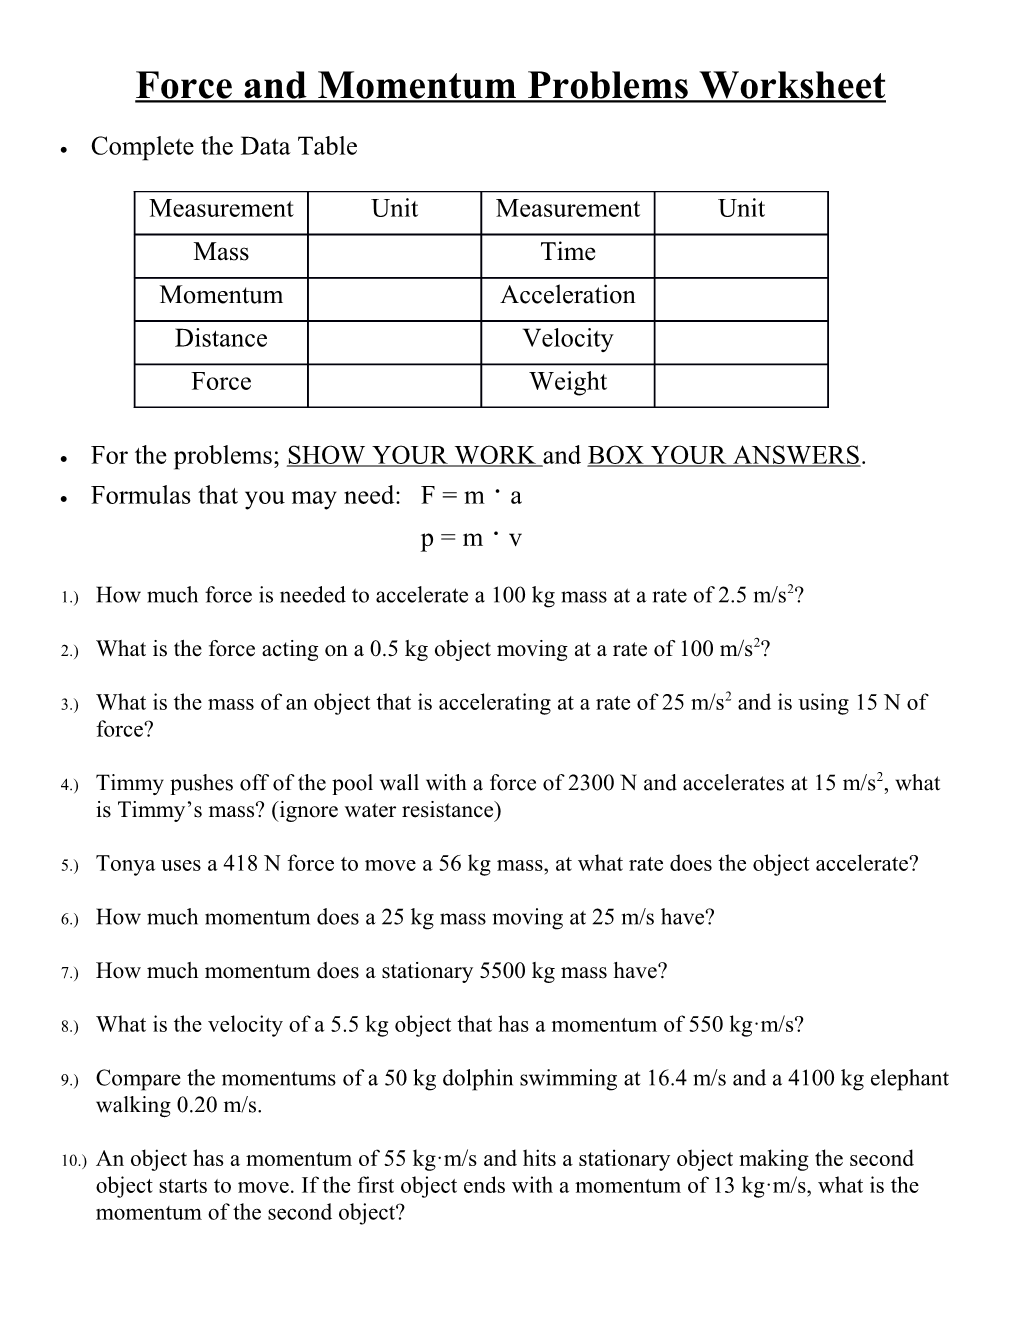 Force and Momentum Problems Worksheet